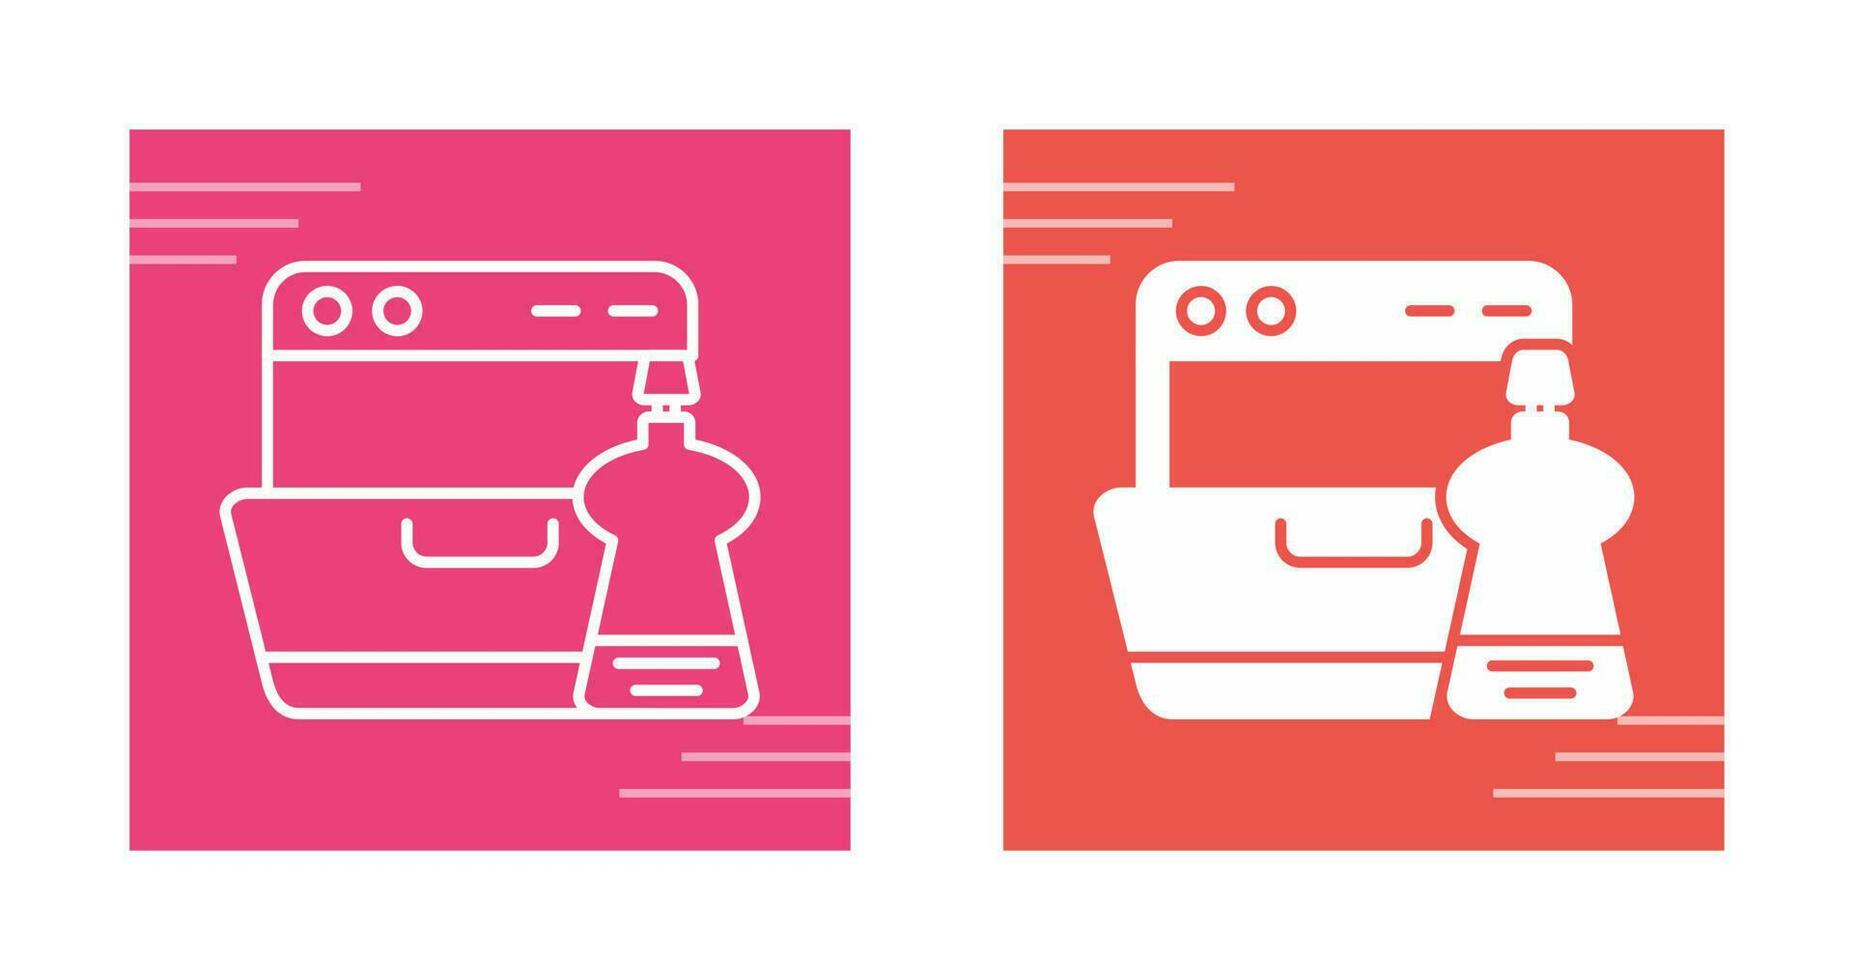 Washing Dishes Vector Icon